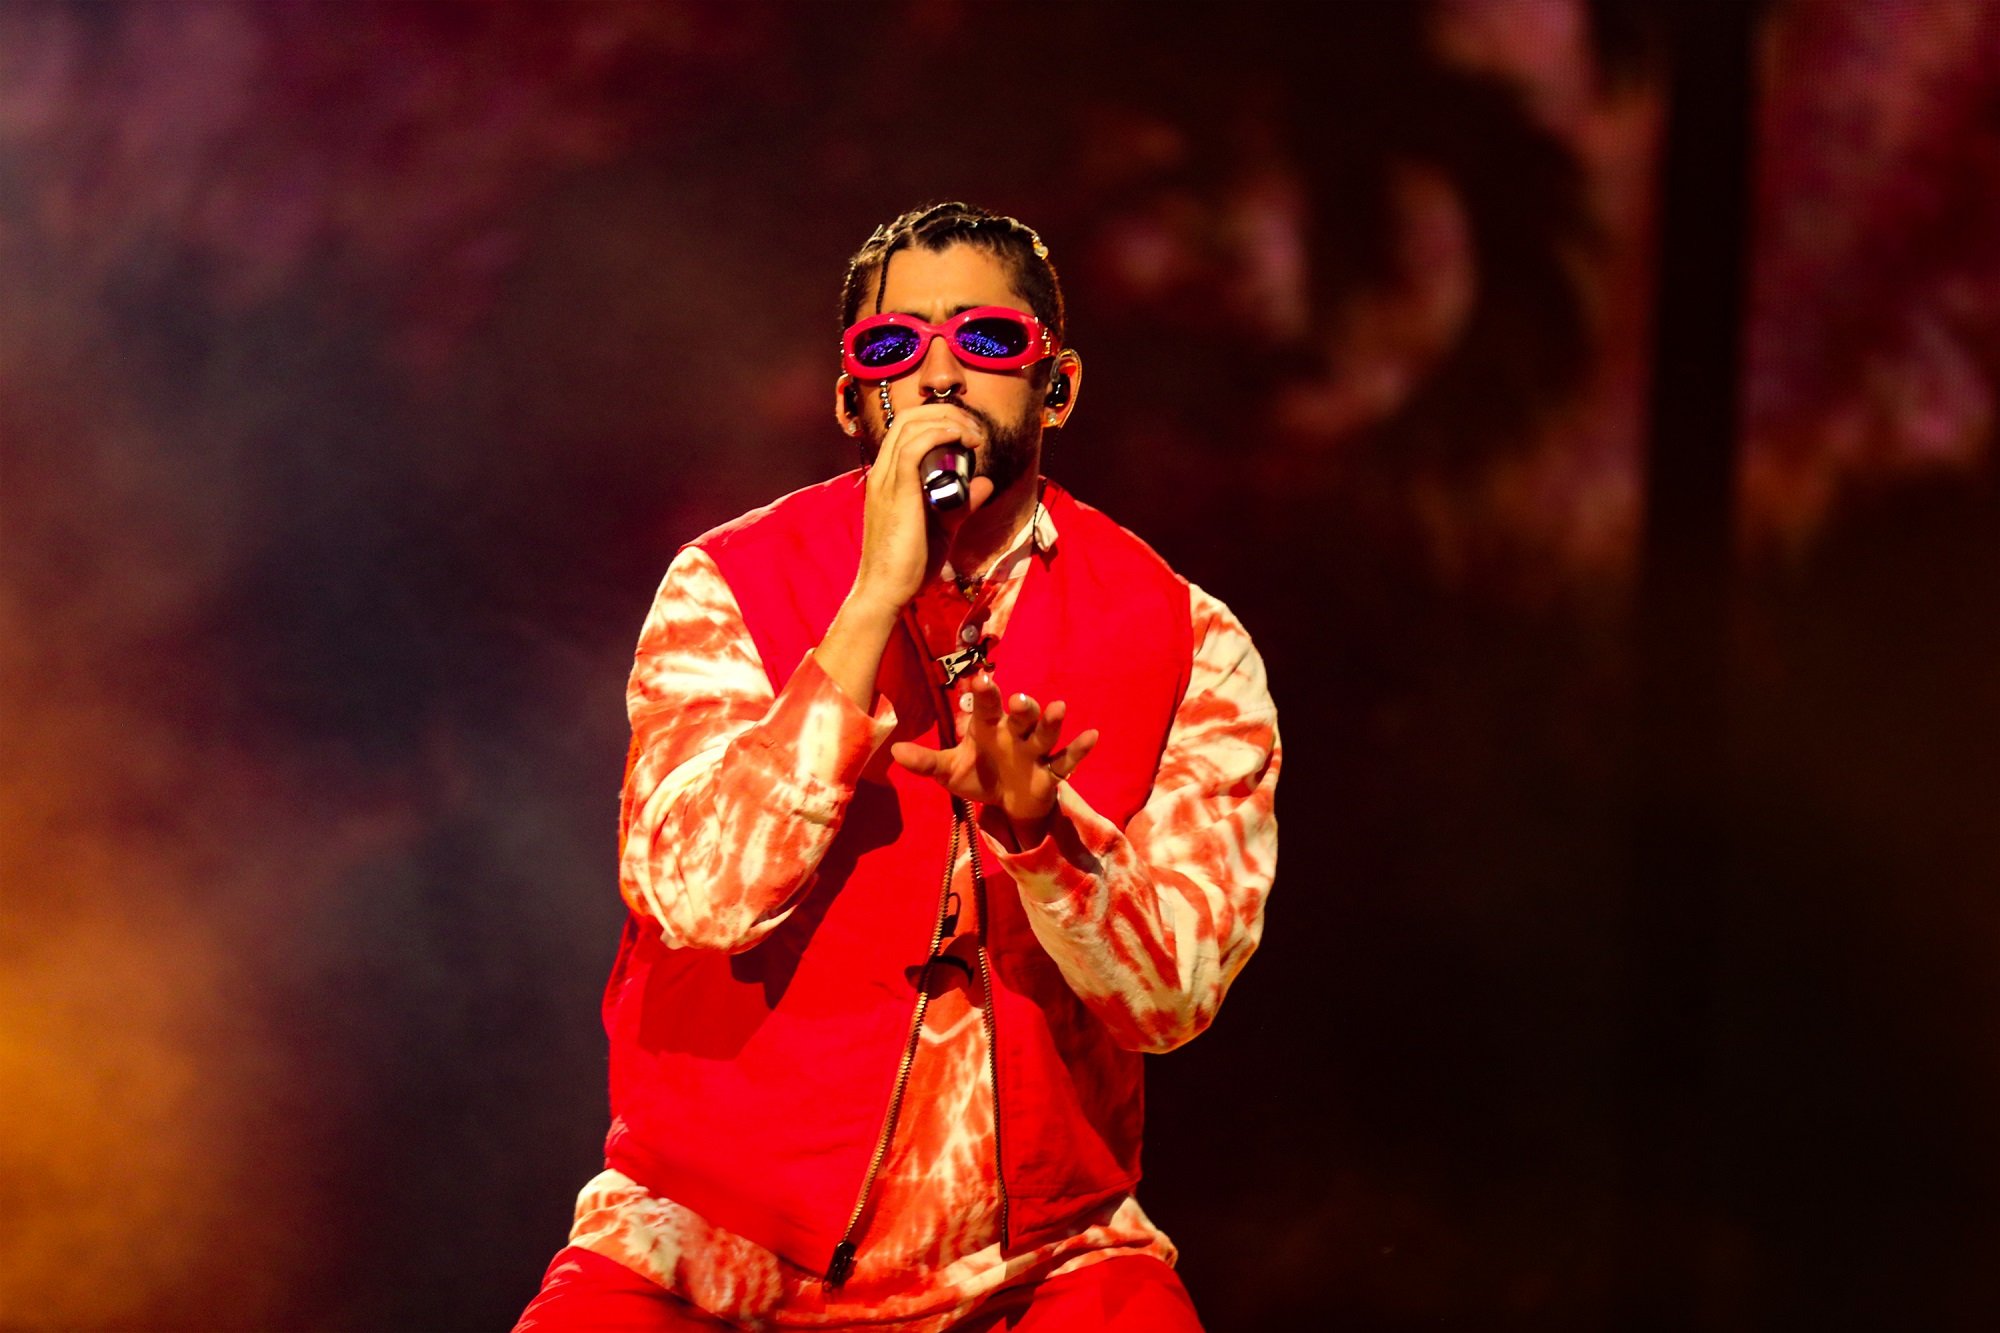 Bad Bunny performs wearing a red outfit and red sunglasses